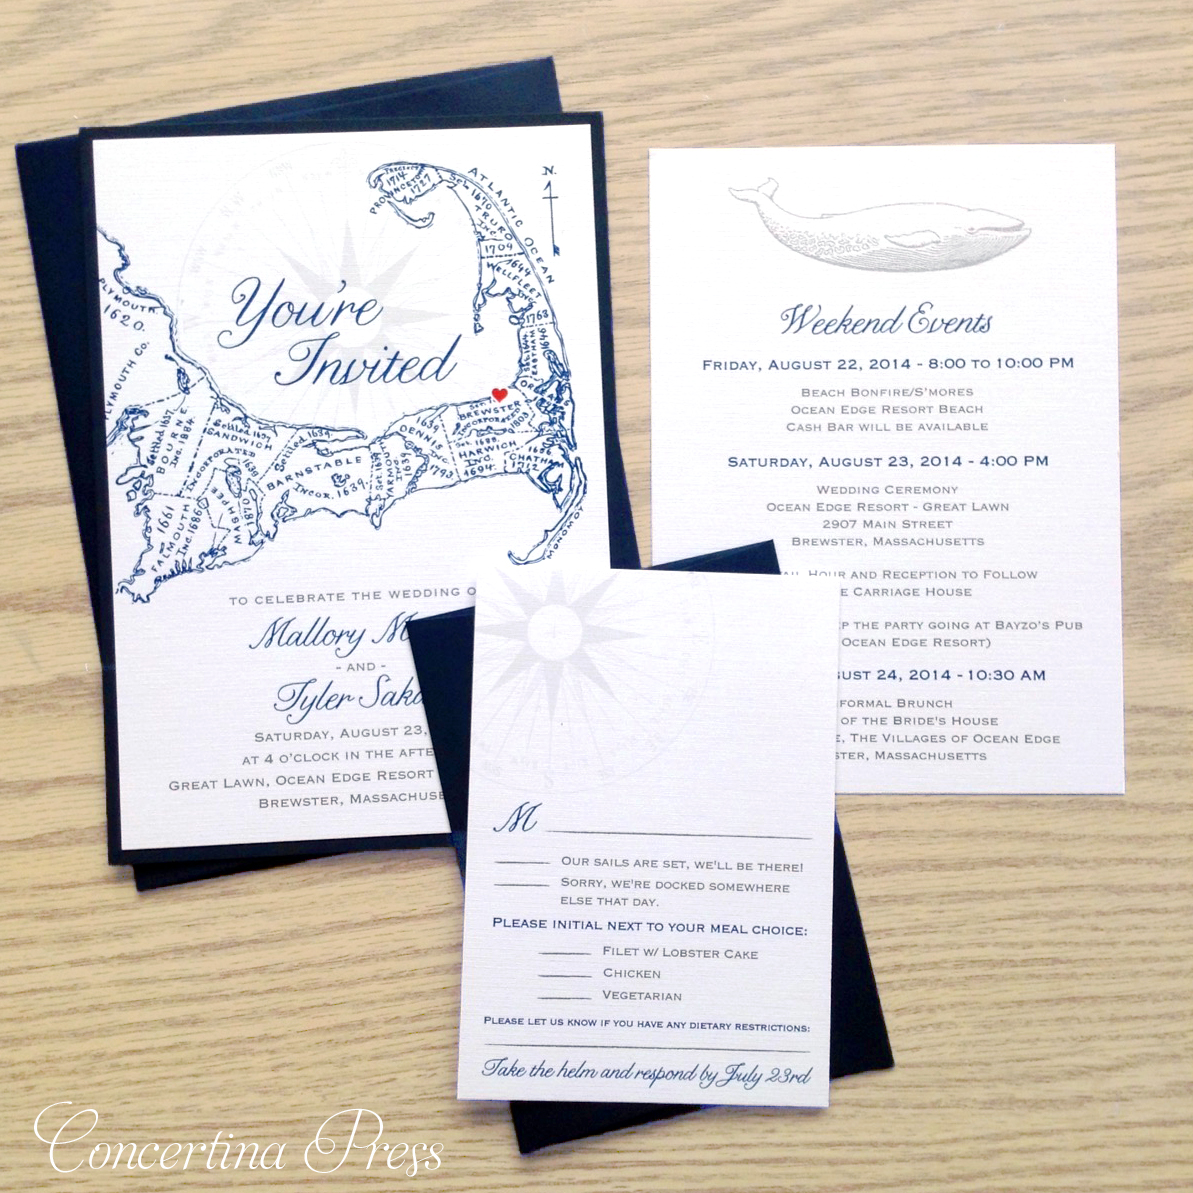 Concertina Press - Stationery and Invitations: Cape Cod Wedding Invitations for a Wedding at Ocean Edge in Brewster